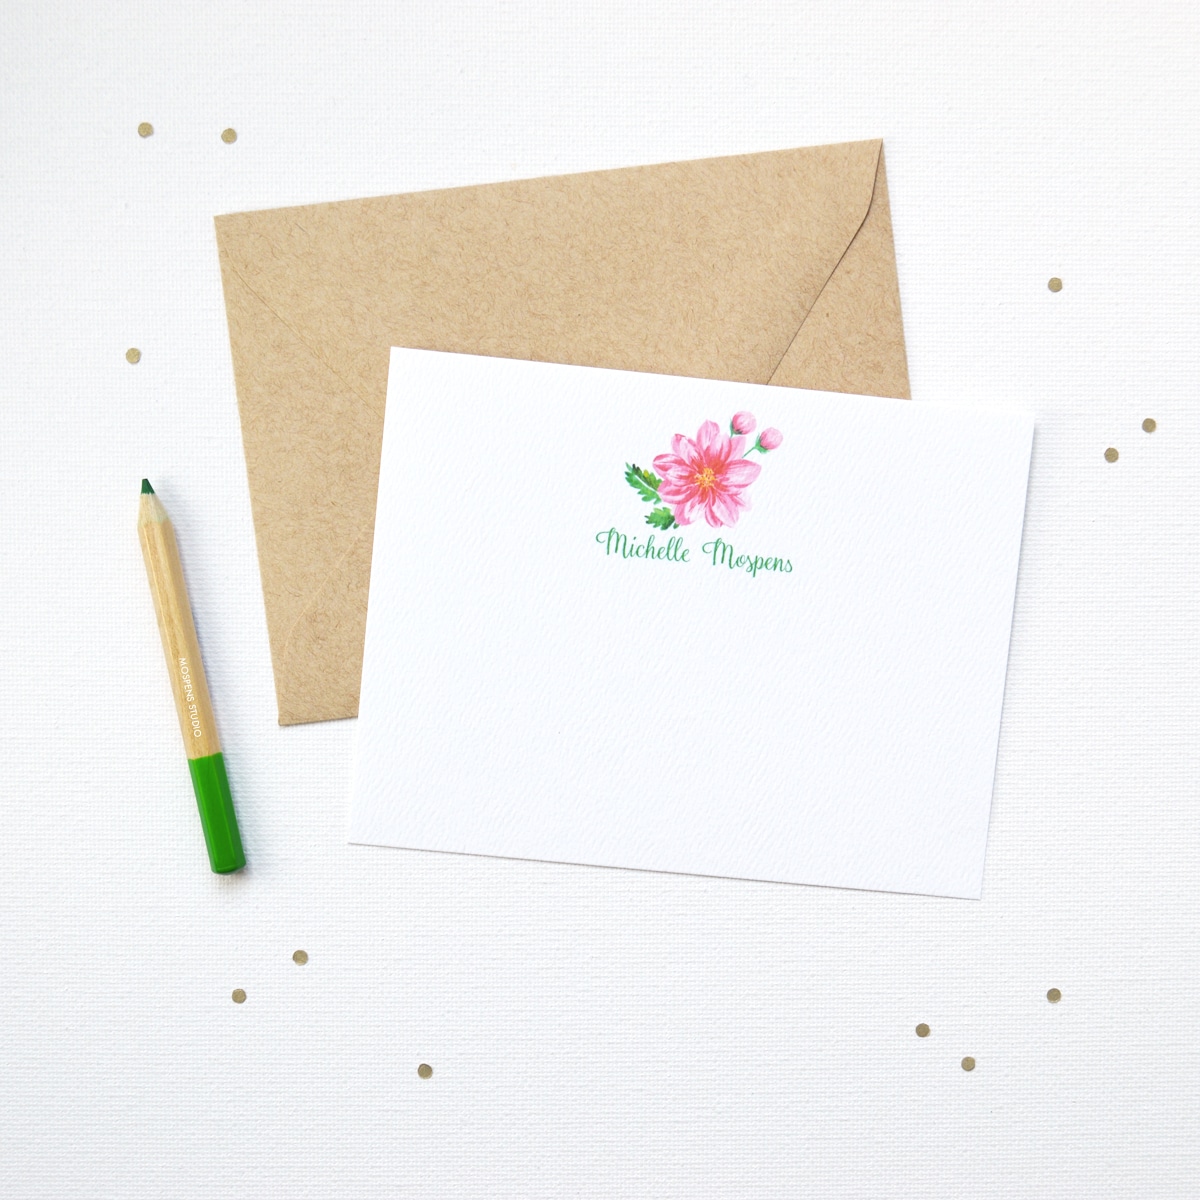 OUR FAVORITE FLORAL STATIONERY